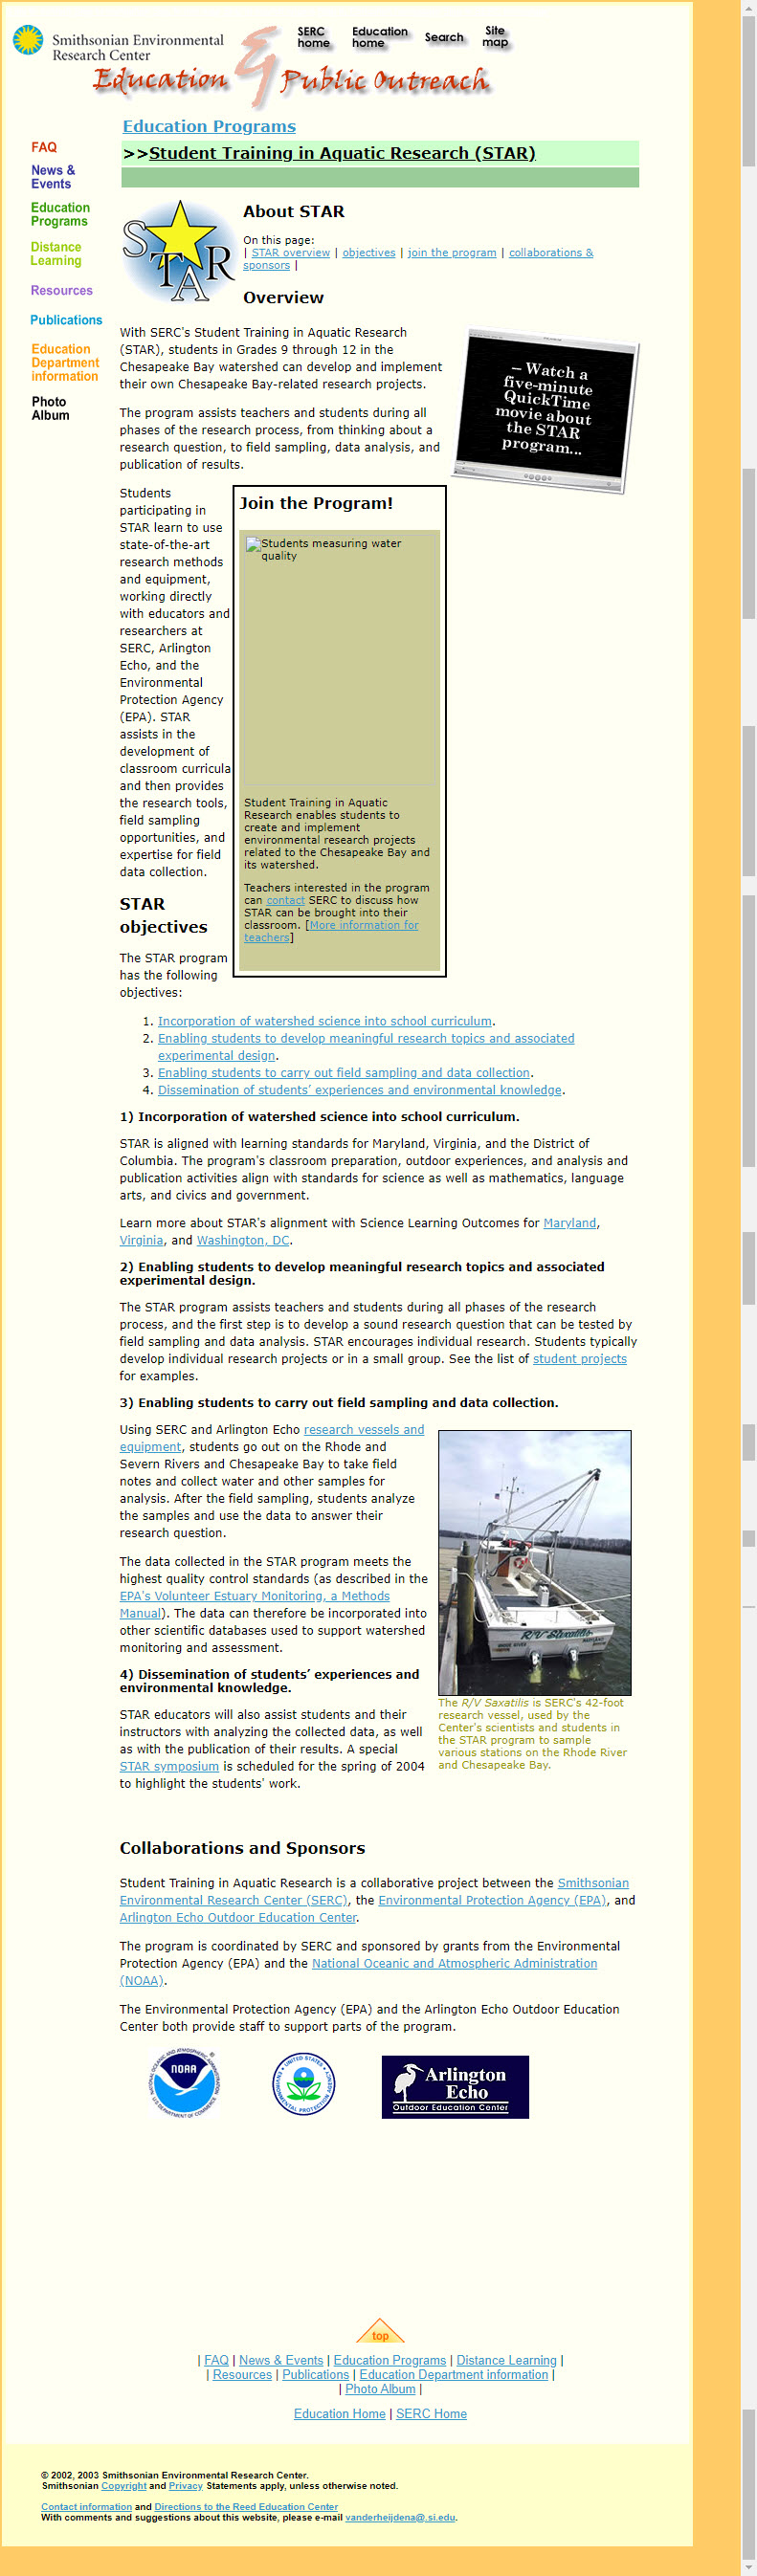 Front page of a SERC site for education and public outreach.